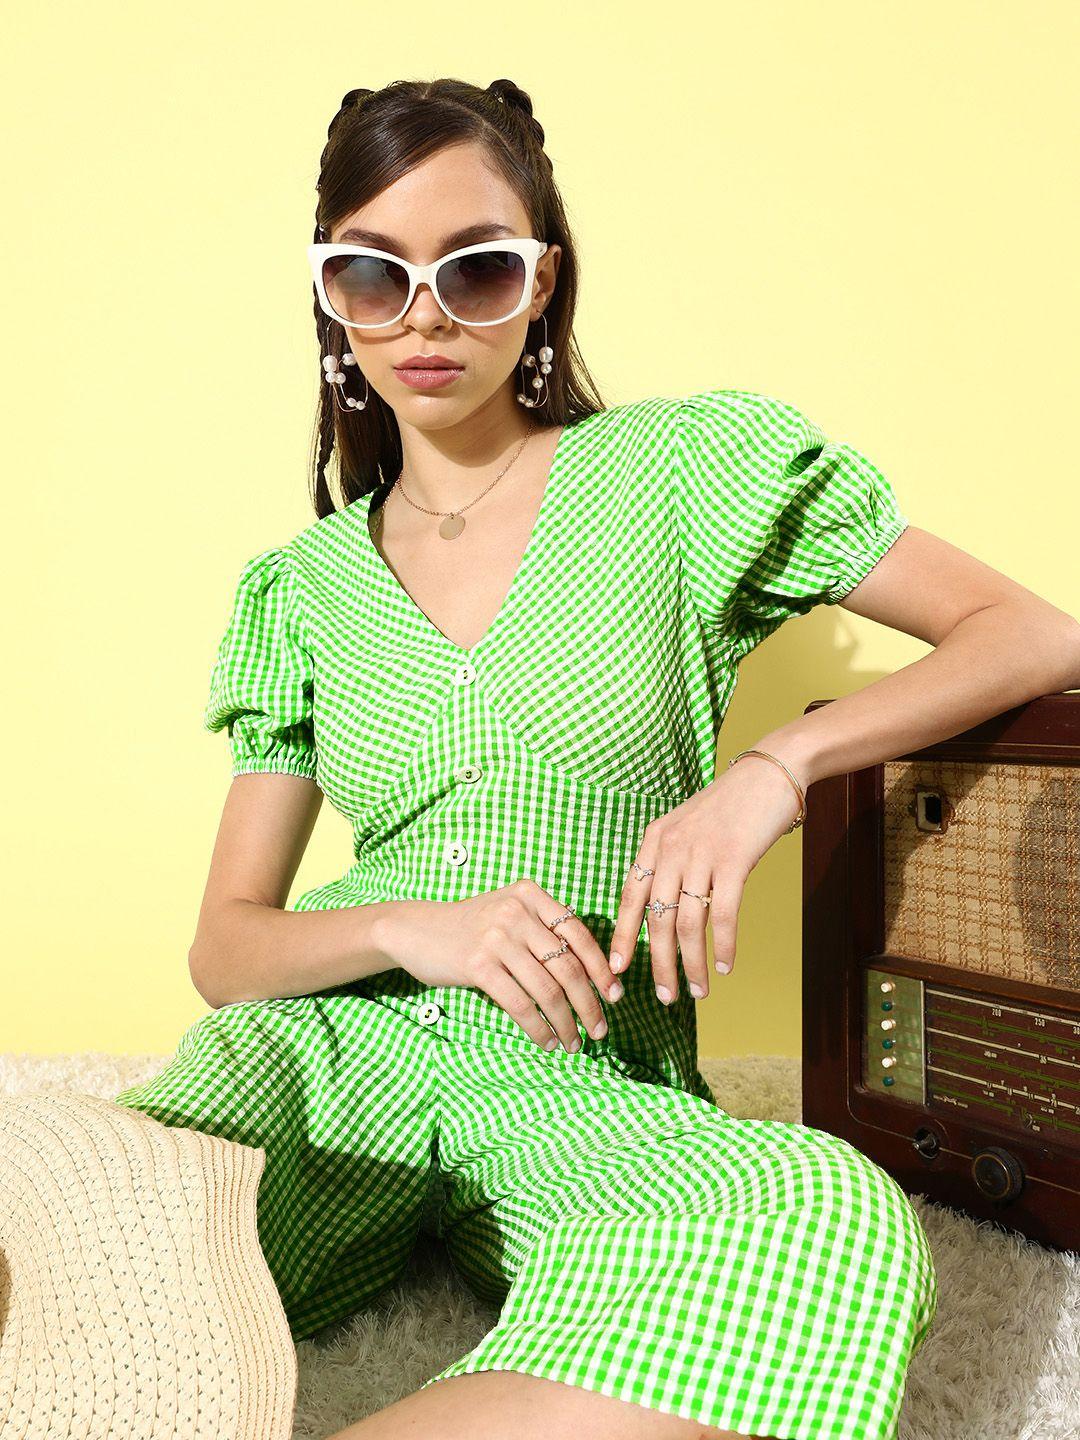 style-quotient-women-gorgeous-green-checked-summer-gingham-jumpsuit